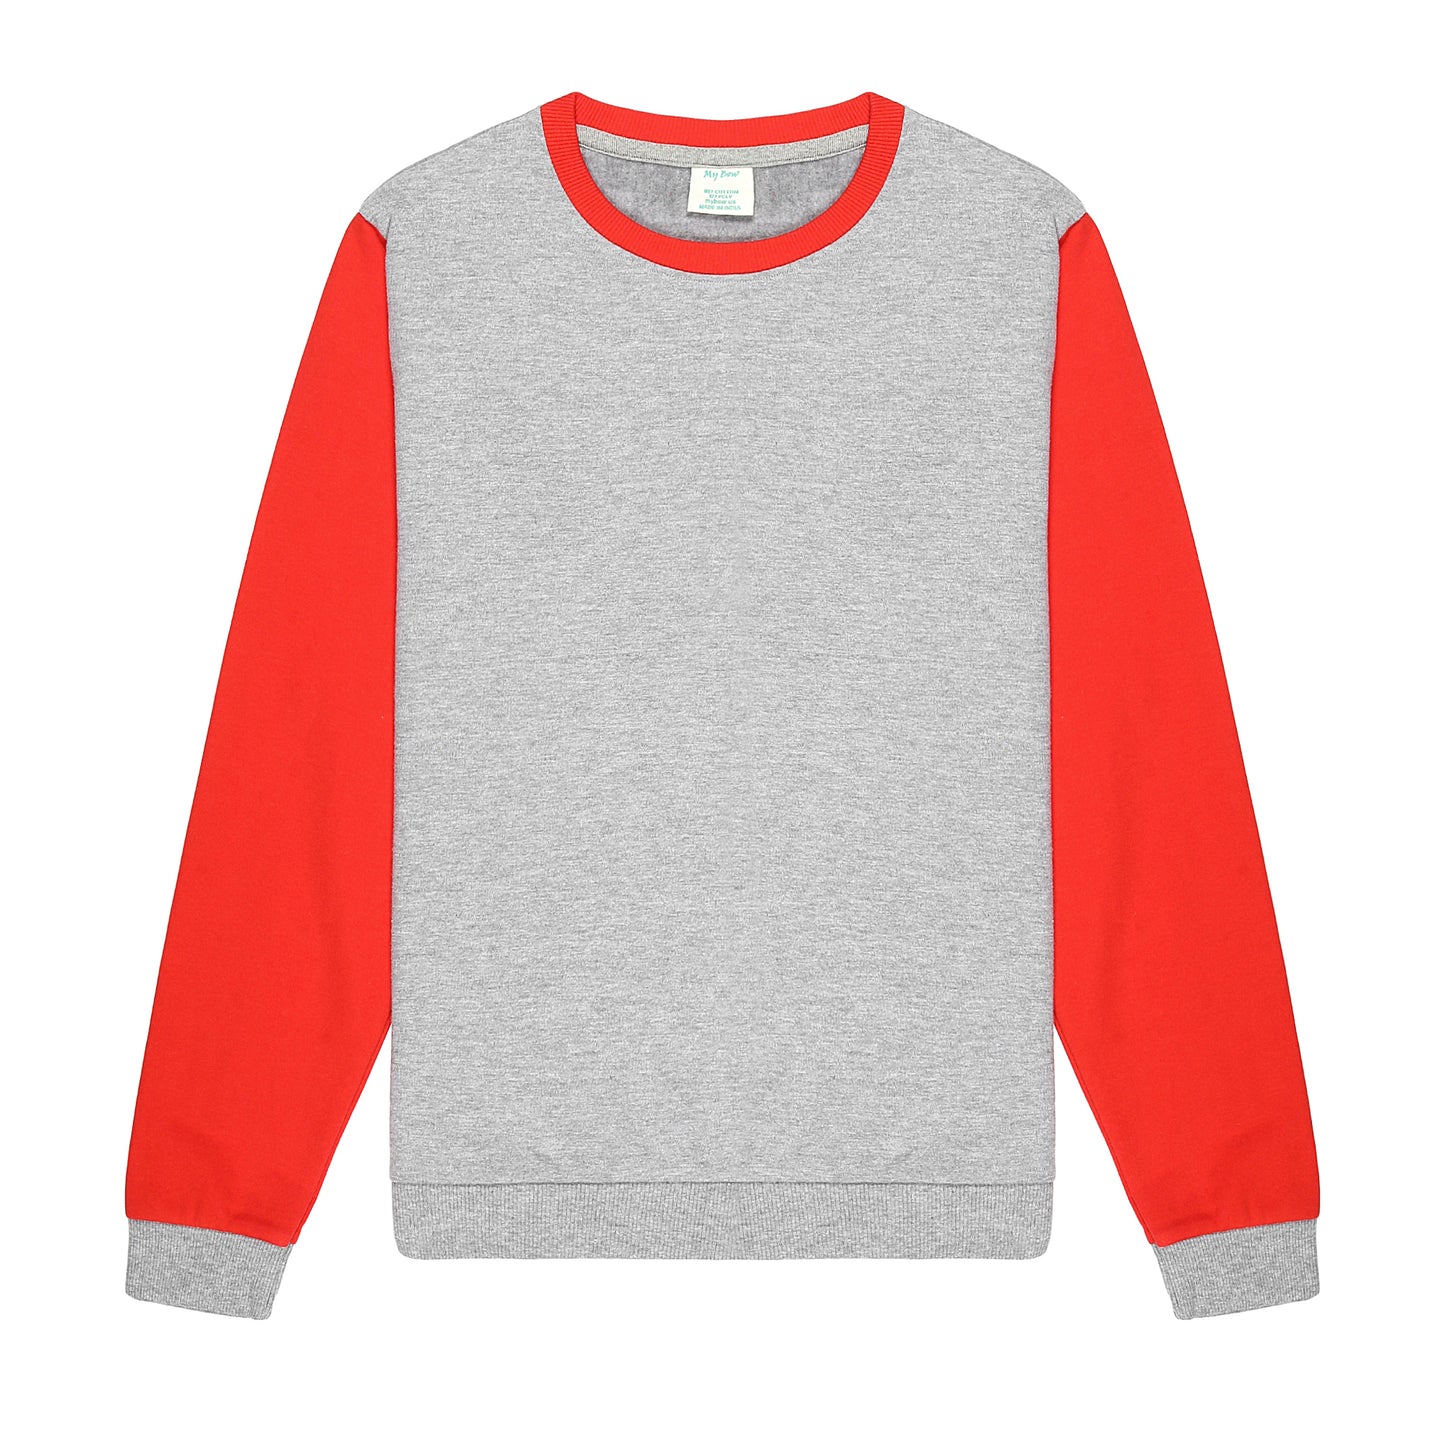 My Bow Unisex Soft Brushed Fleece Casual Basic Pullover Crew Neck Sweatshirt for Boys and Girls (4 to 14 Years)